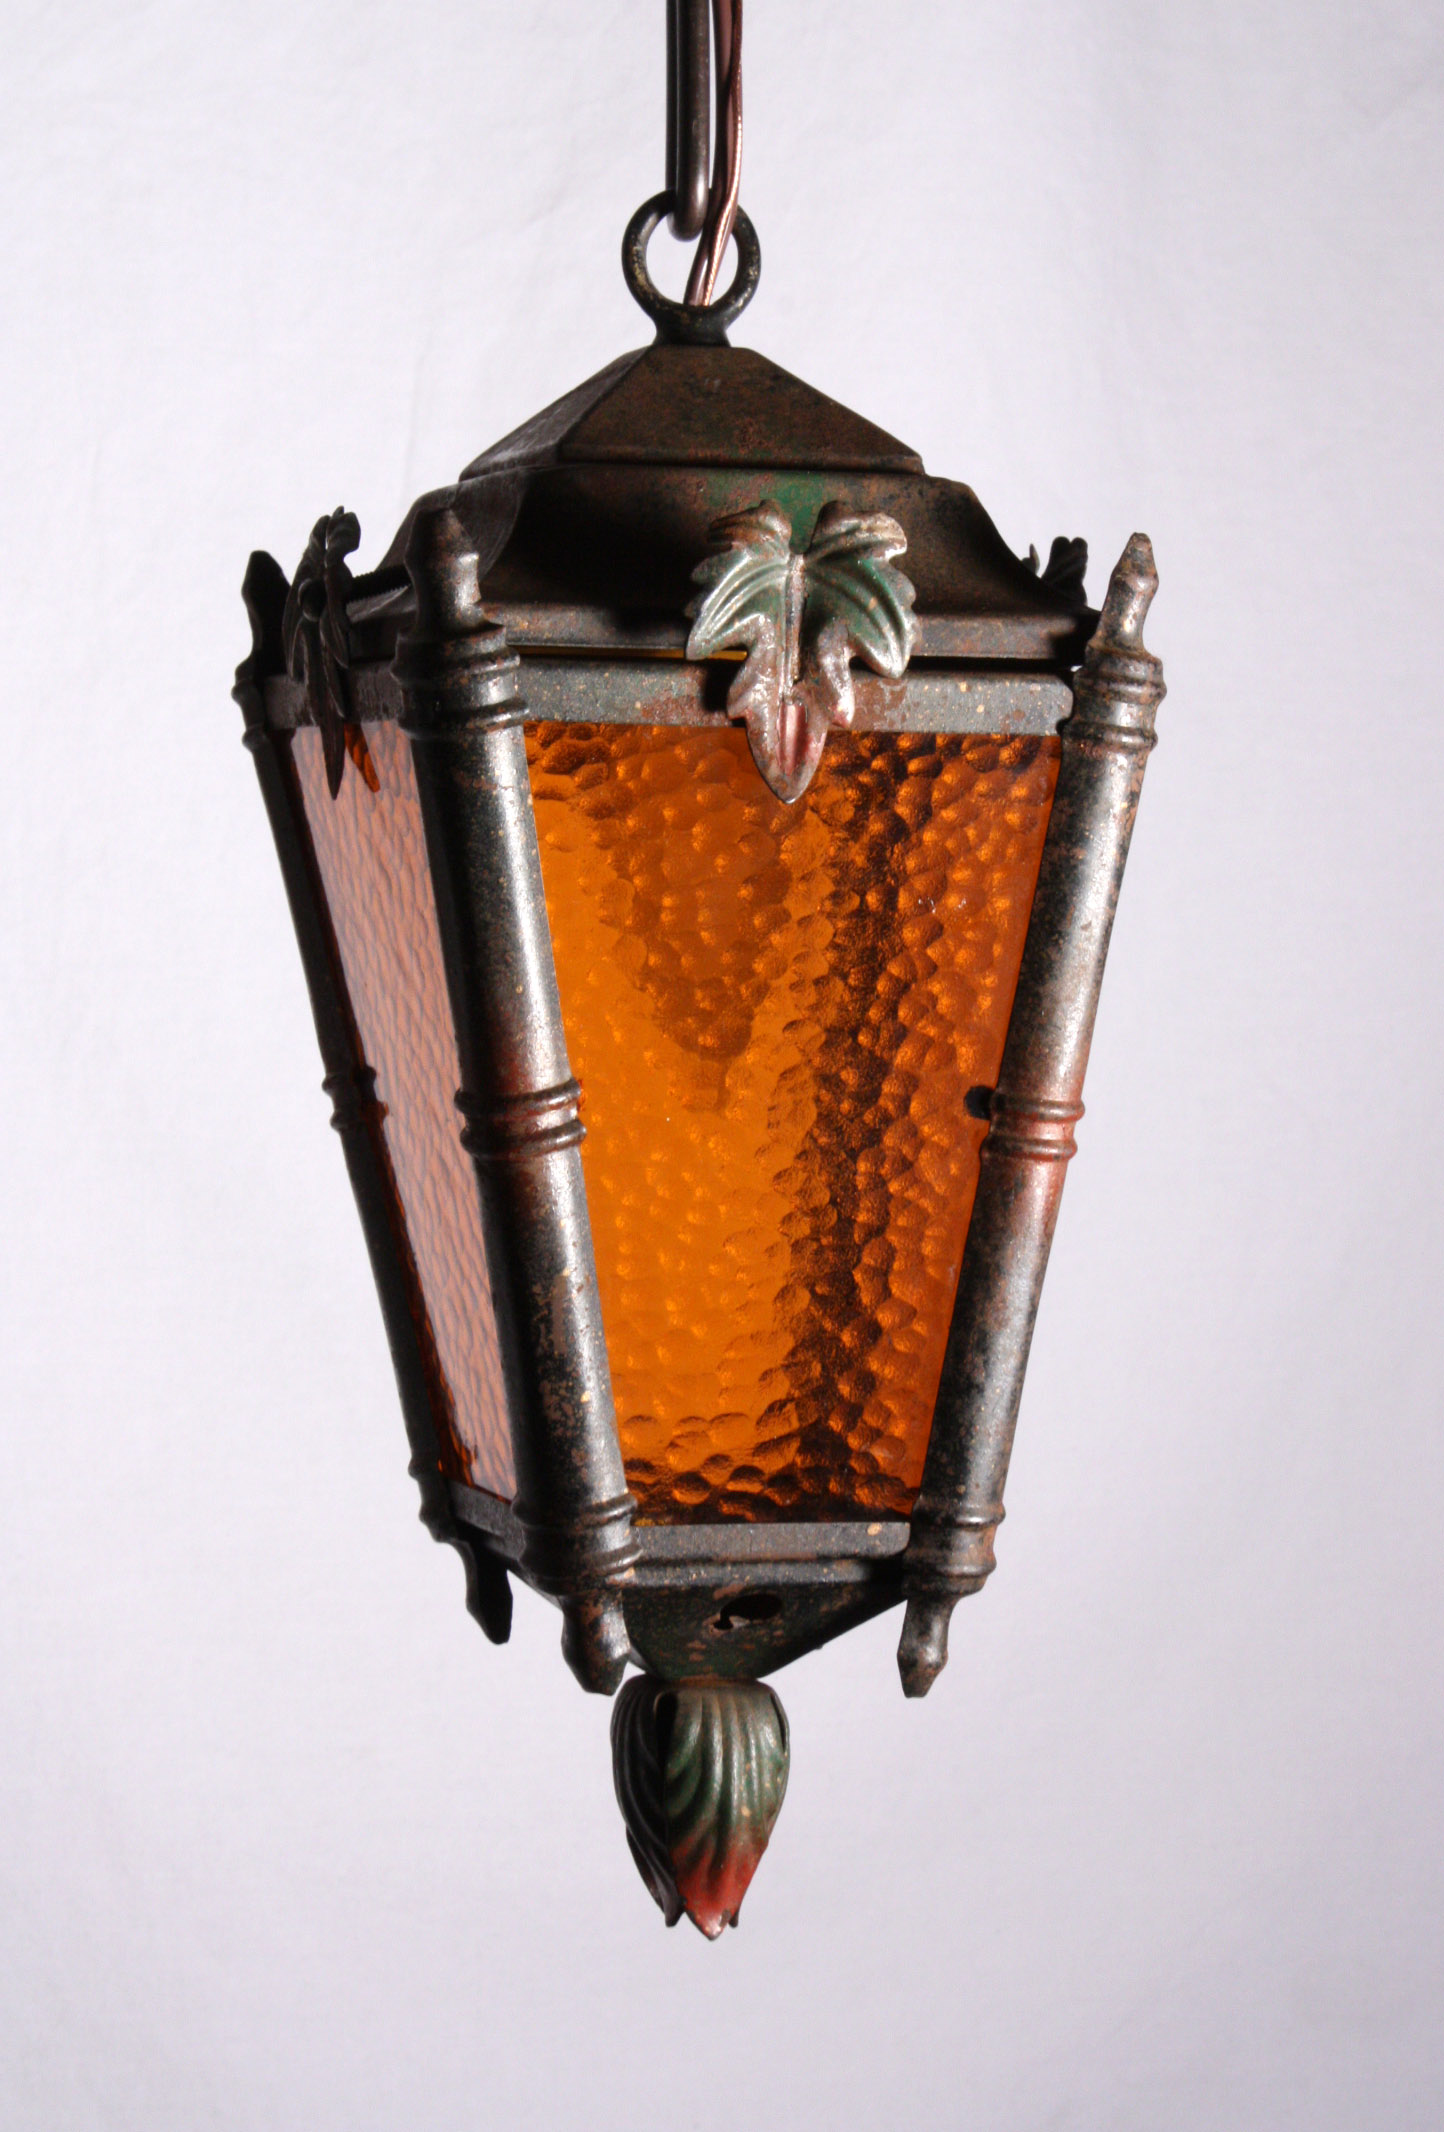 SOLD Delightful Antique Lantern with Maple Leaves, Original Polychrome Finish, c. 1920’s-0